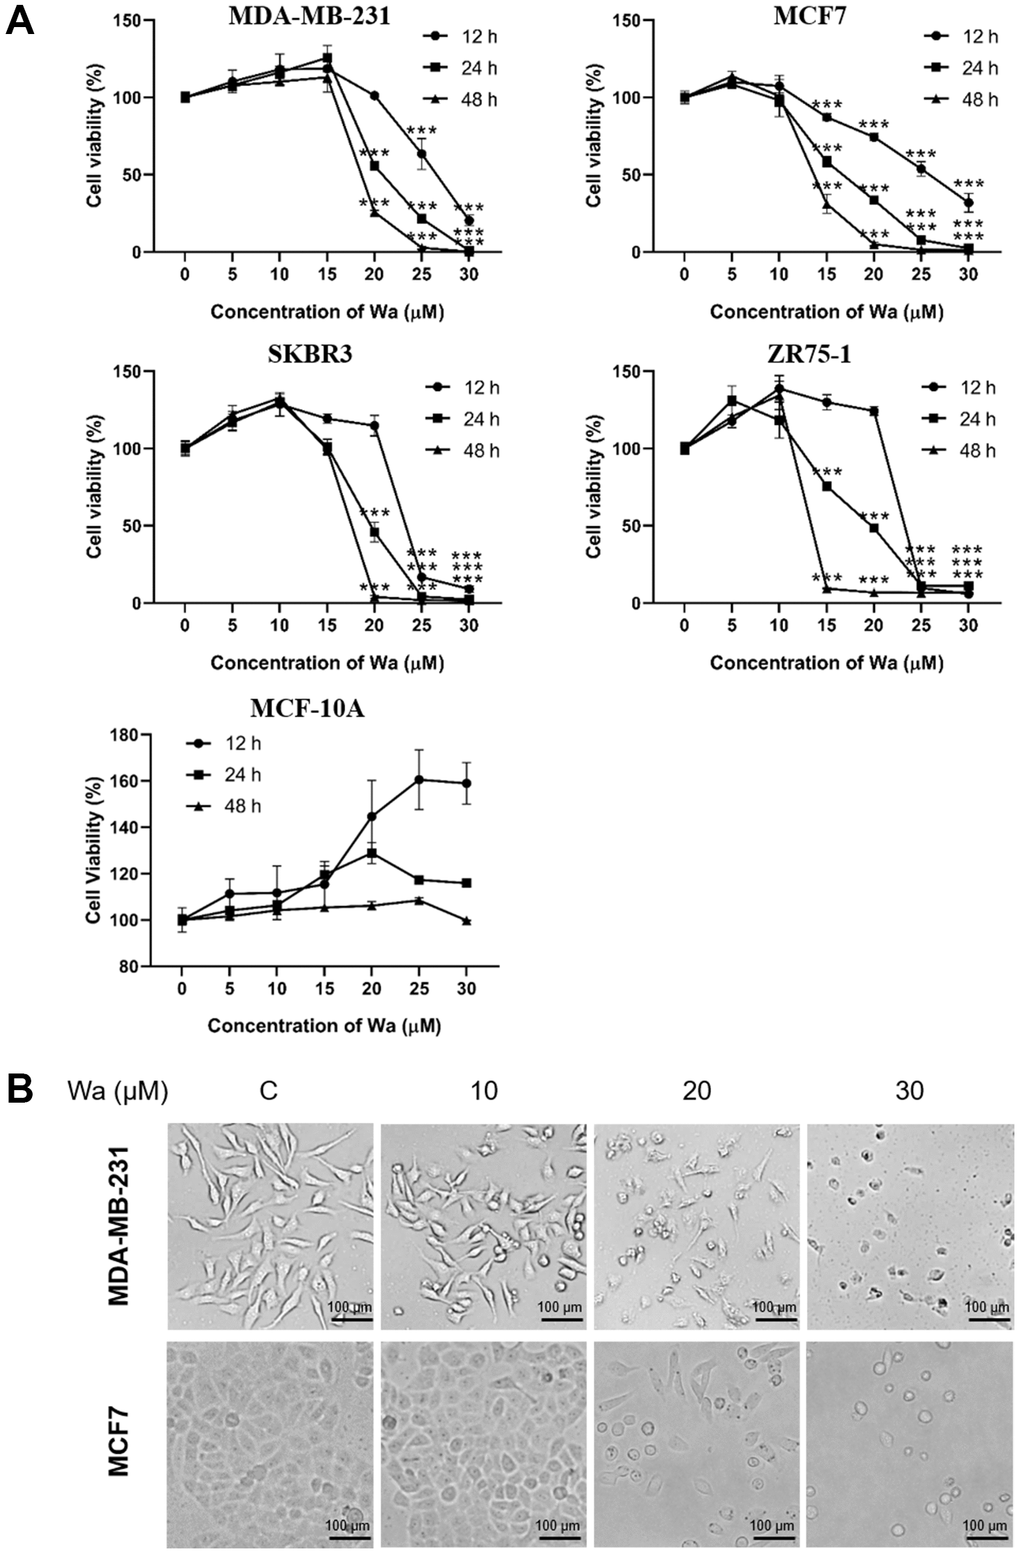 Warangalone decreases the viability of breast cancer cells. (A) MDA-MB-231, MCF7, SKBR3, ZR75-1 and MCF-10A cells were treated with warangalone of different concentrations for 12, 24, and 48 h. Cell viability was detected by MTT assay. One-way ANOVA was used to compare between the control and warangalone treatment groups (n ≥ 3). *P P P B) MDA-MB-231/MCF7 cells were treated with 0, 10, 20 and 30 μM warangalone for 24 h. Cell morphology was observed by microscopy.